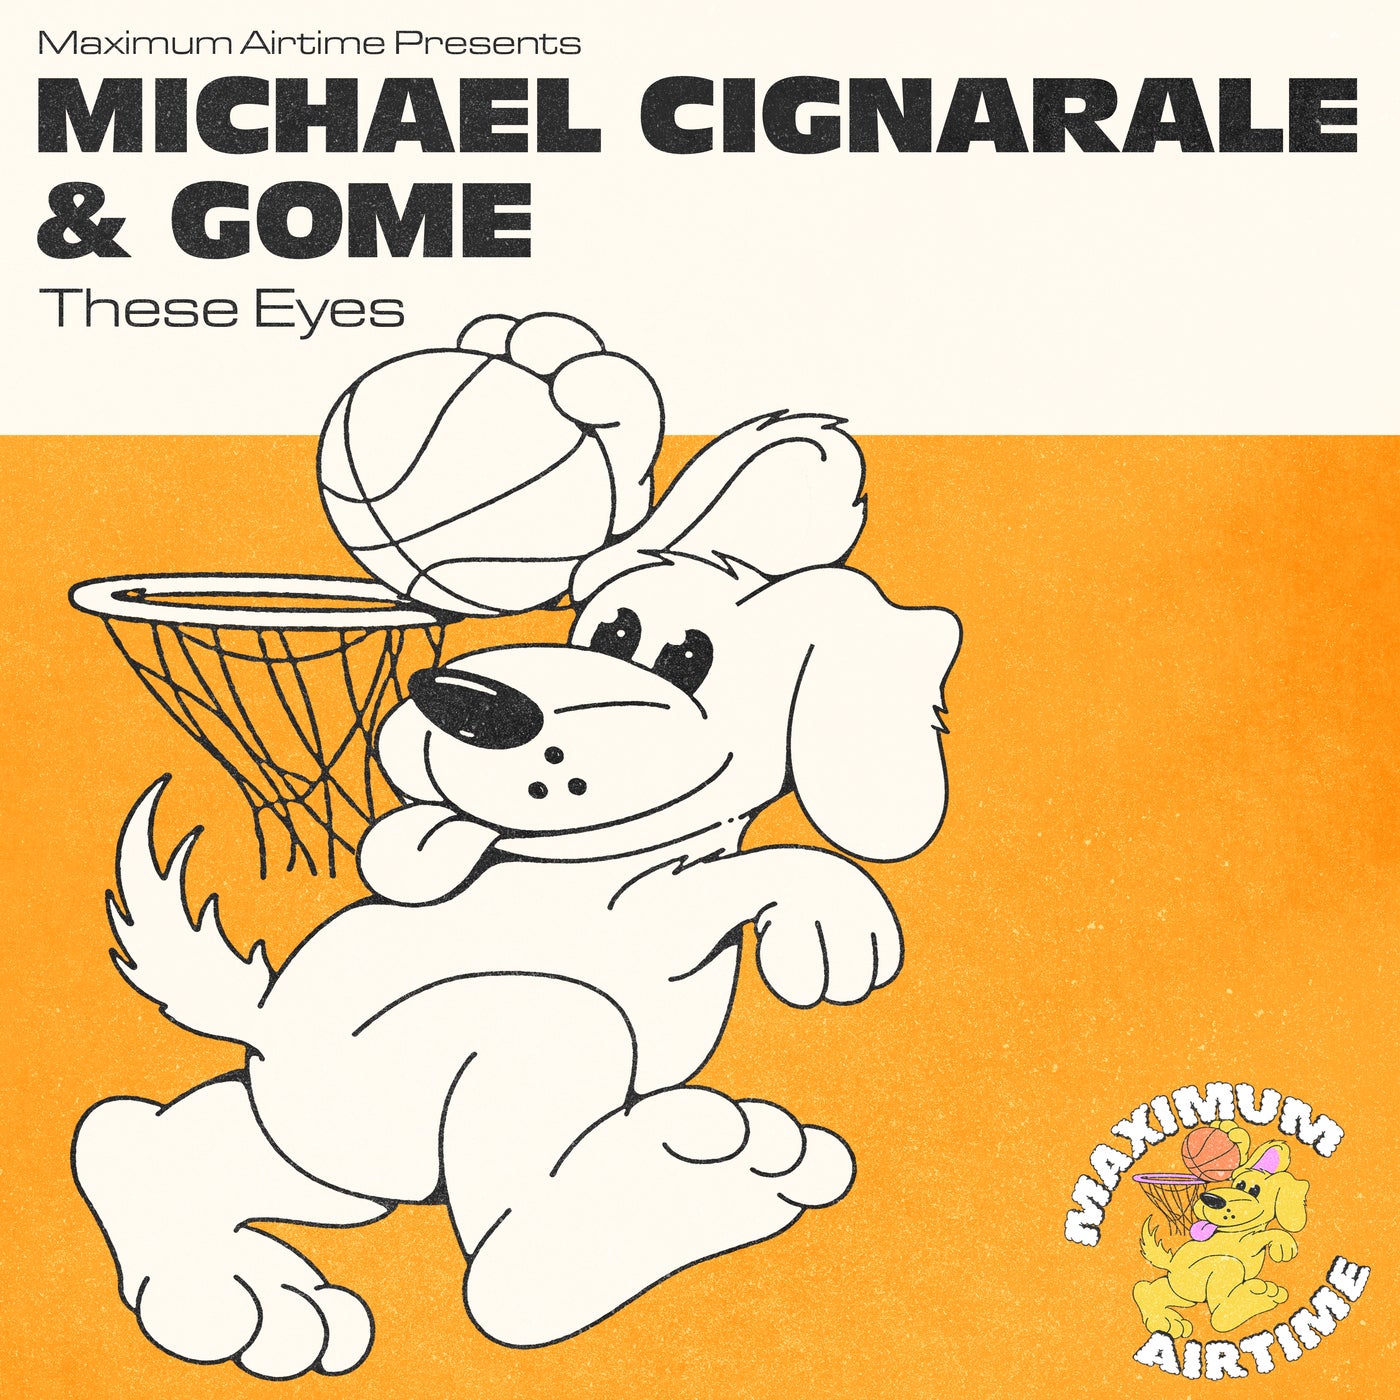 Cover - gome, Michael Cignarale - These Eyes (Original Mix)